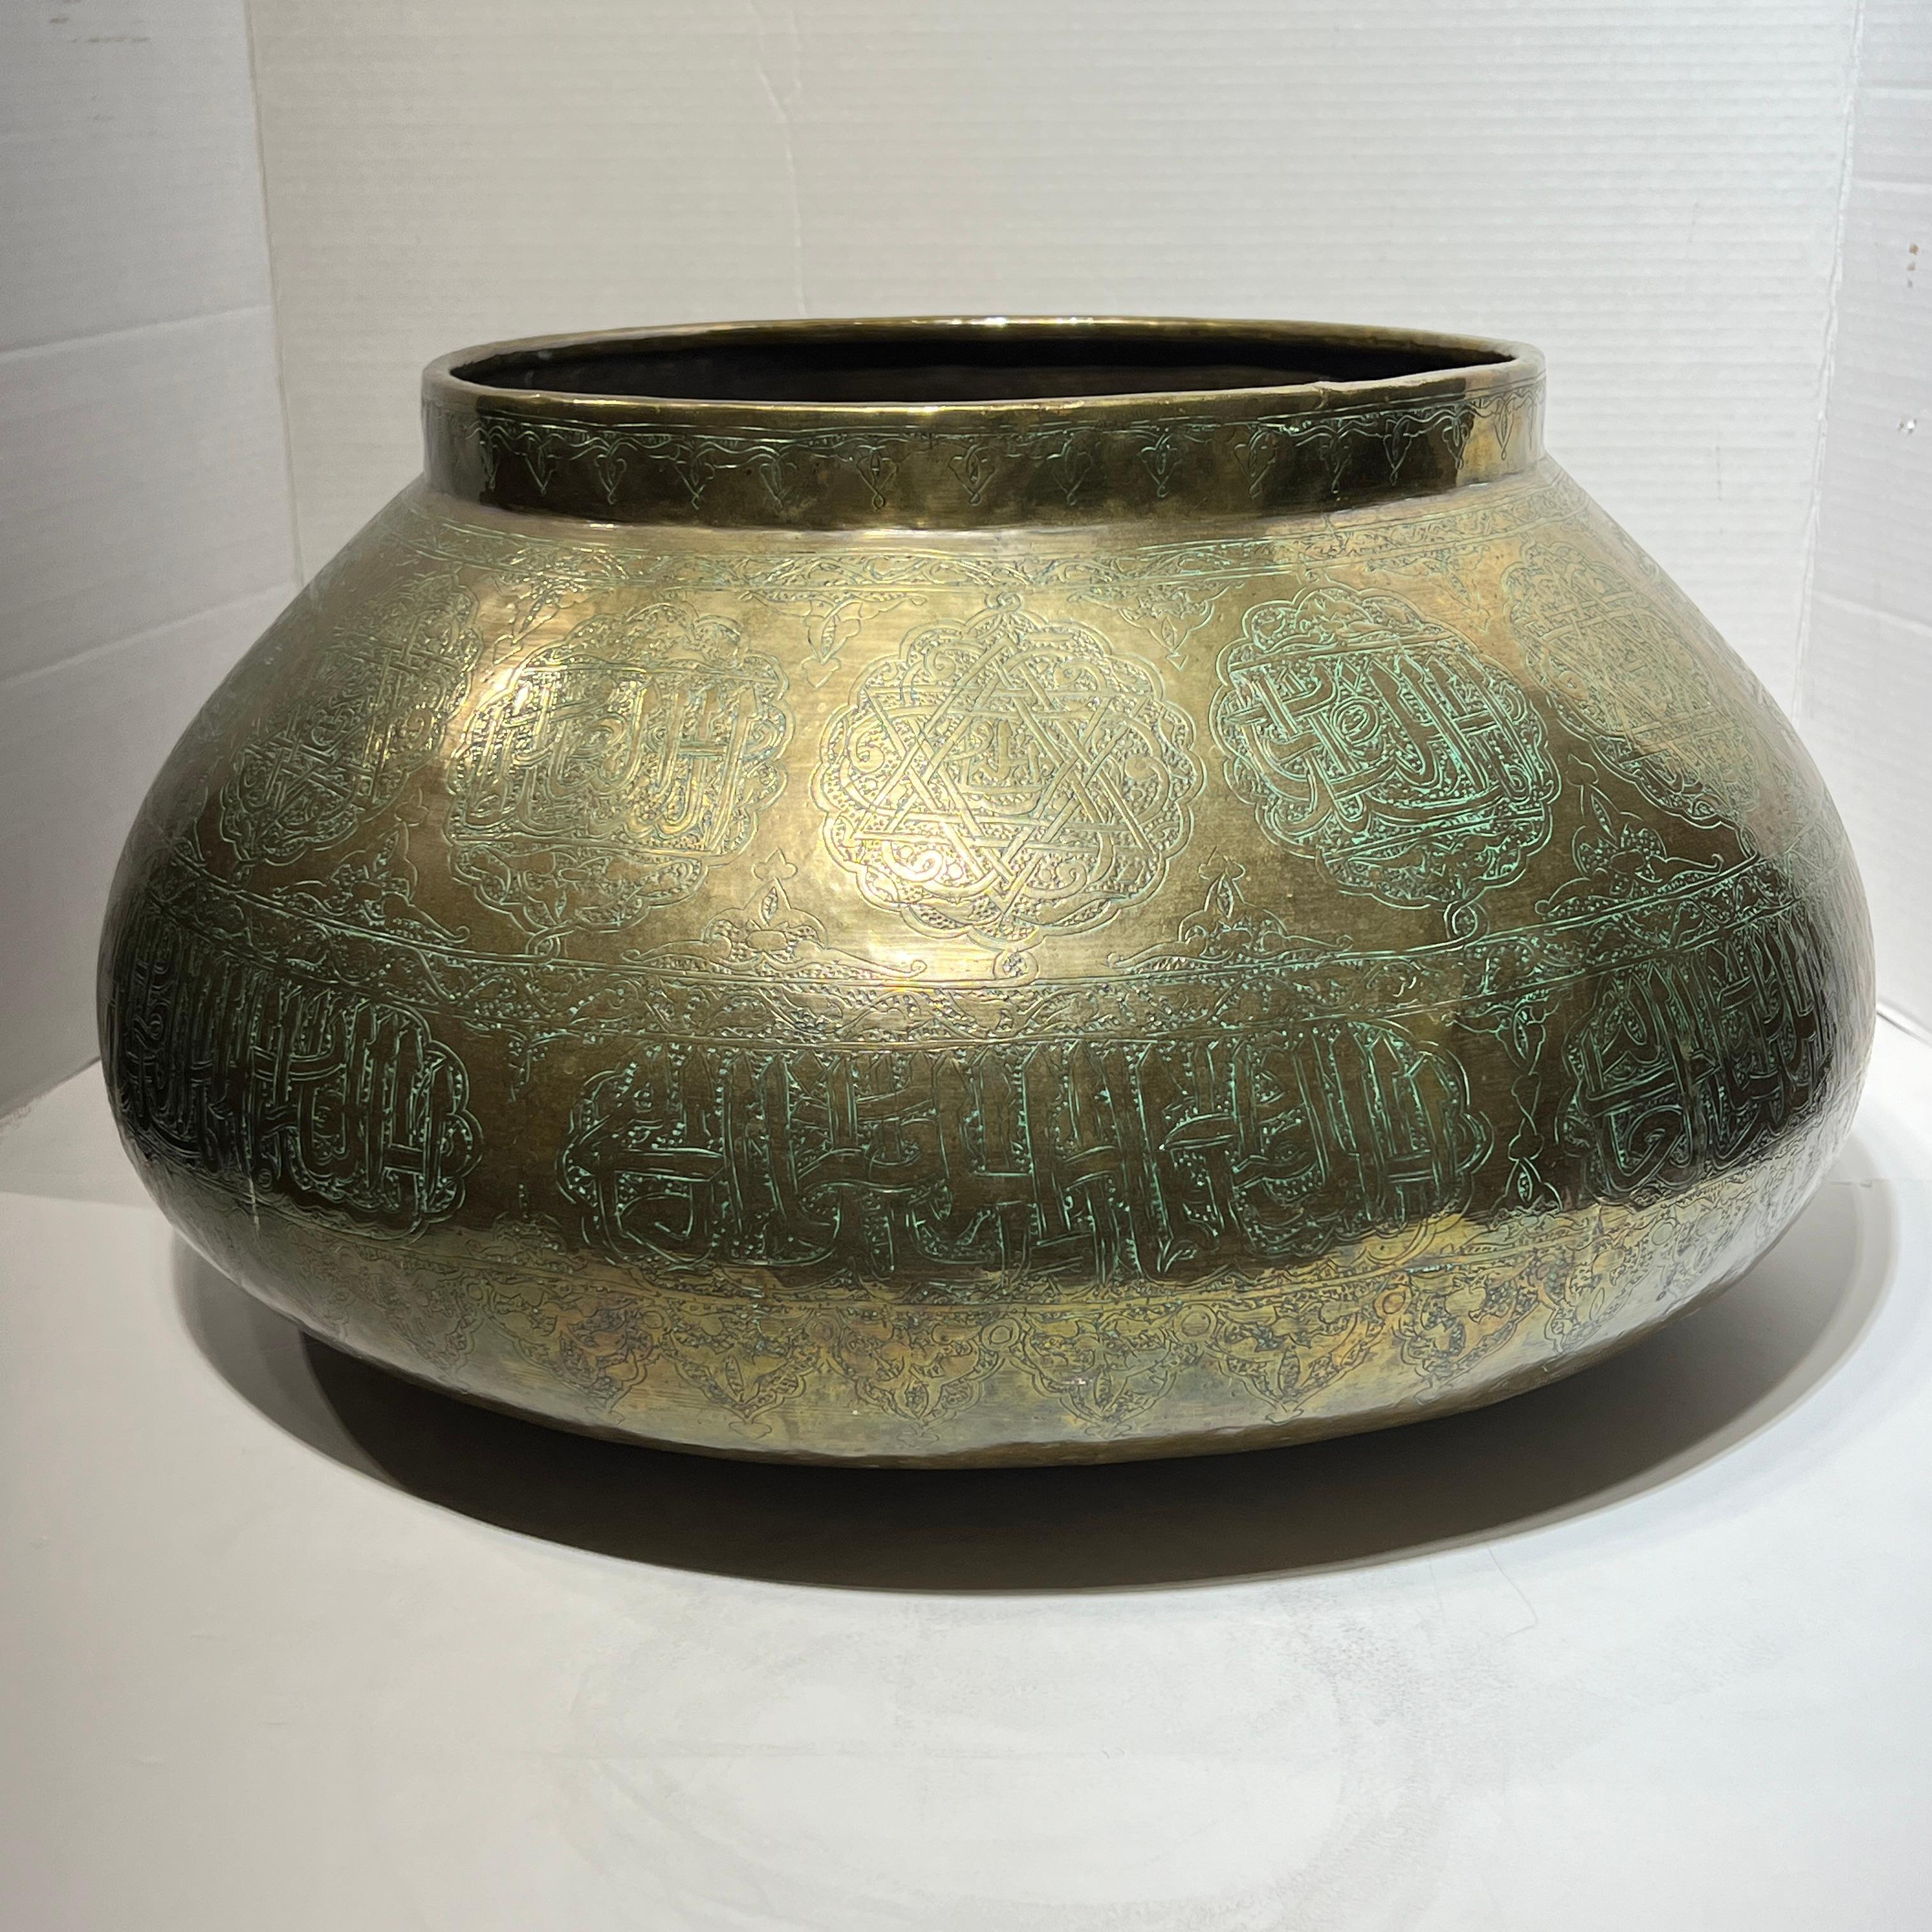 Large 19th Century Islamic Middle Eastern Engraved Brass Centerpiece Bowl For Sale 2